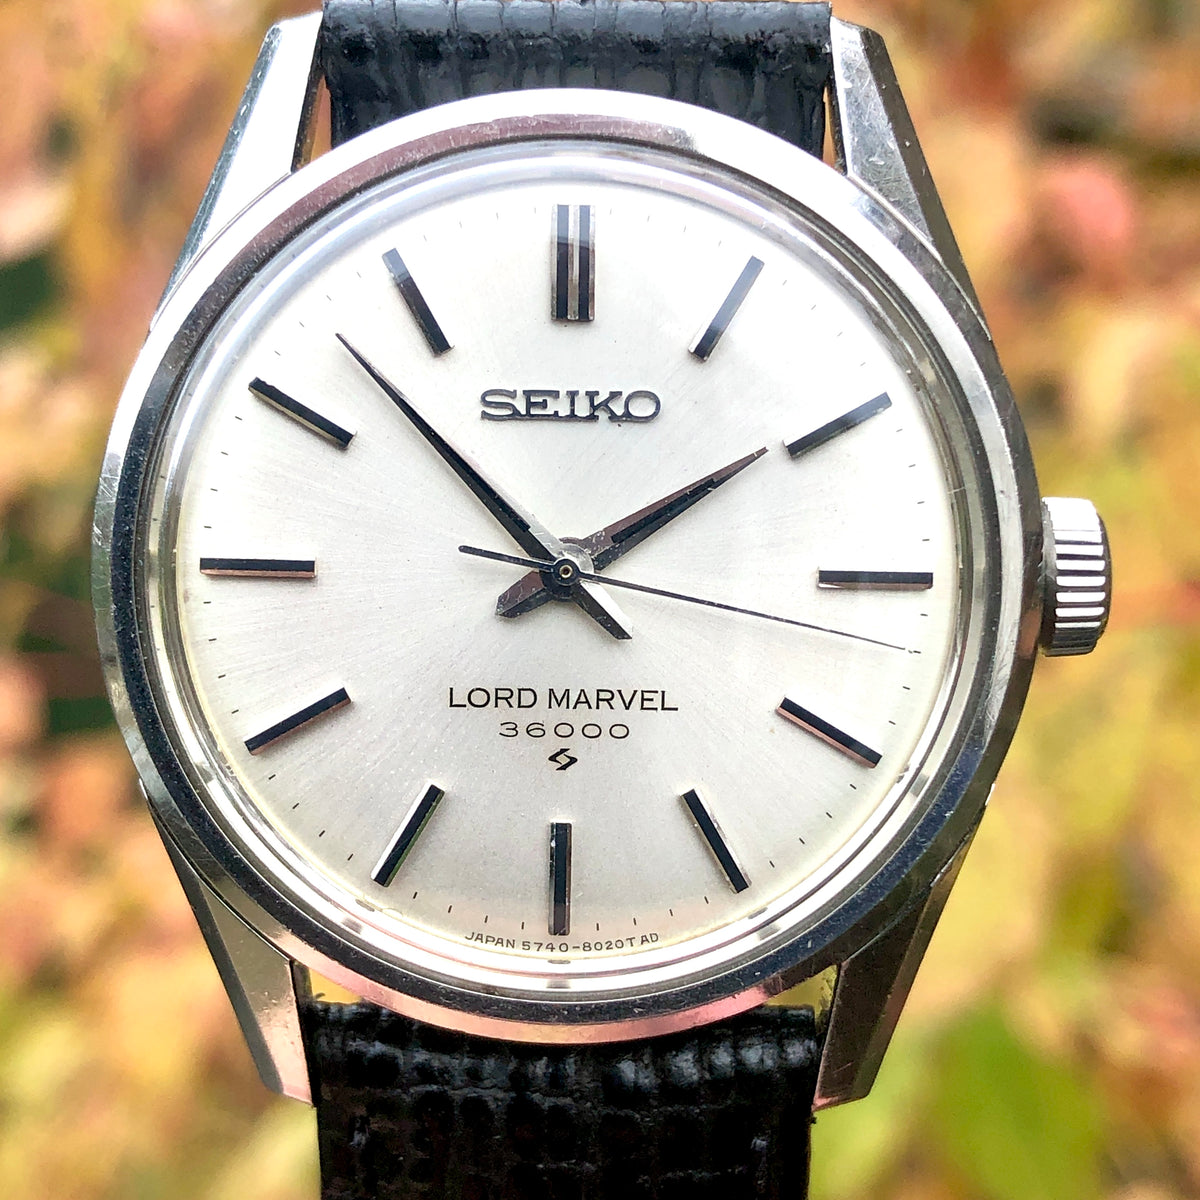 Lord Marvel 5740-8000 SH caseback from April 1967 - Now in Berlin –  classicseiko